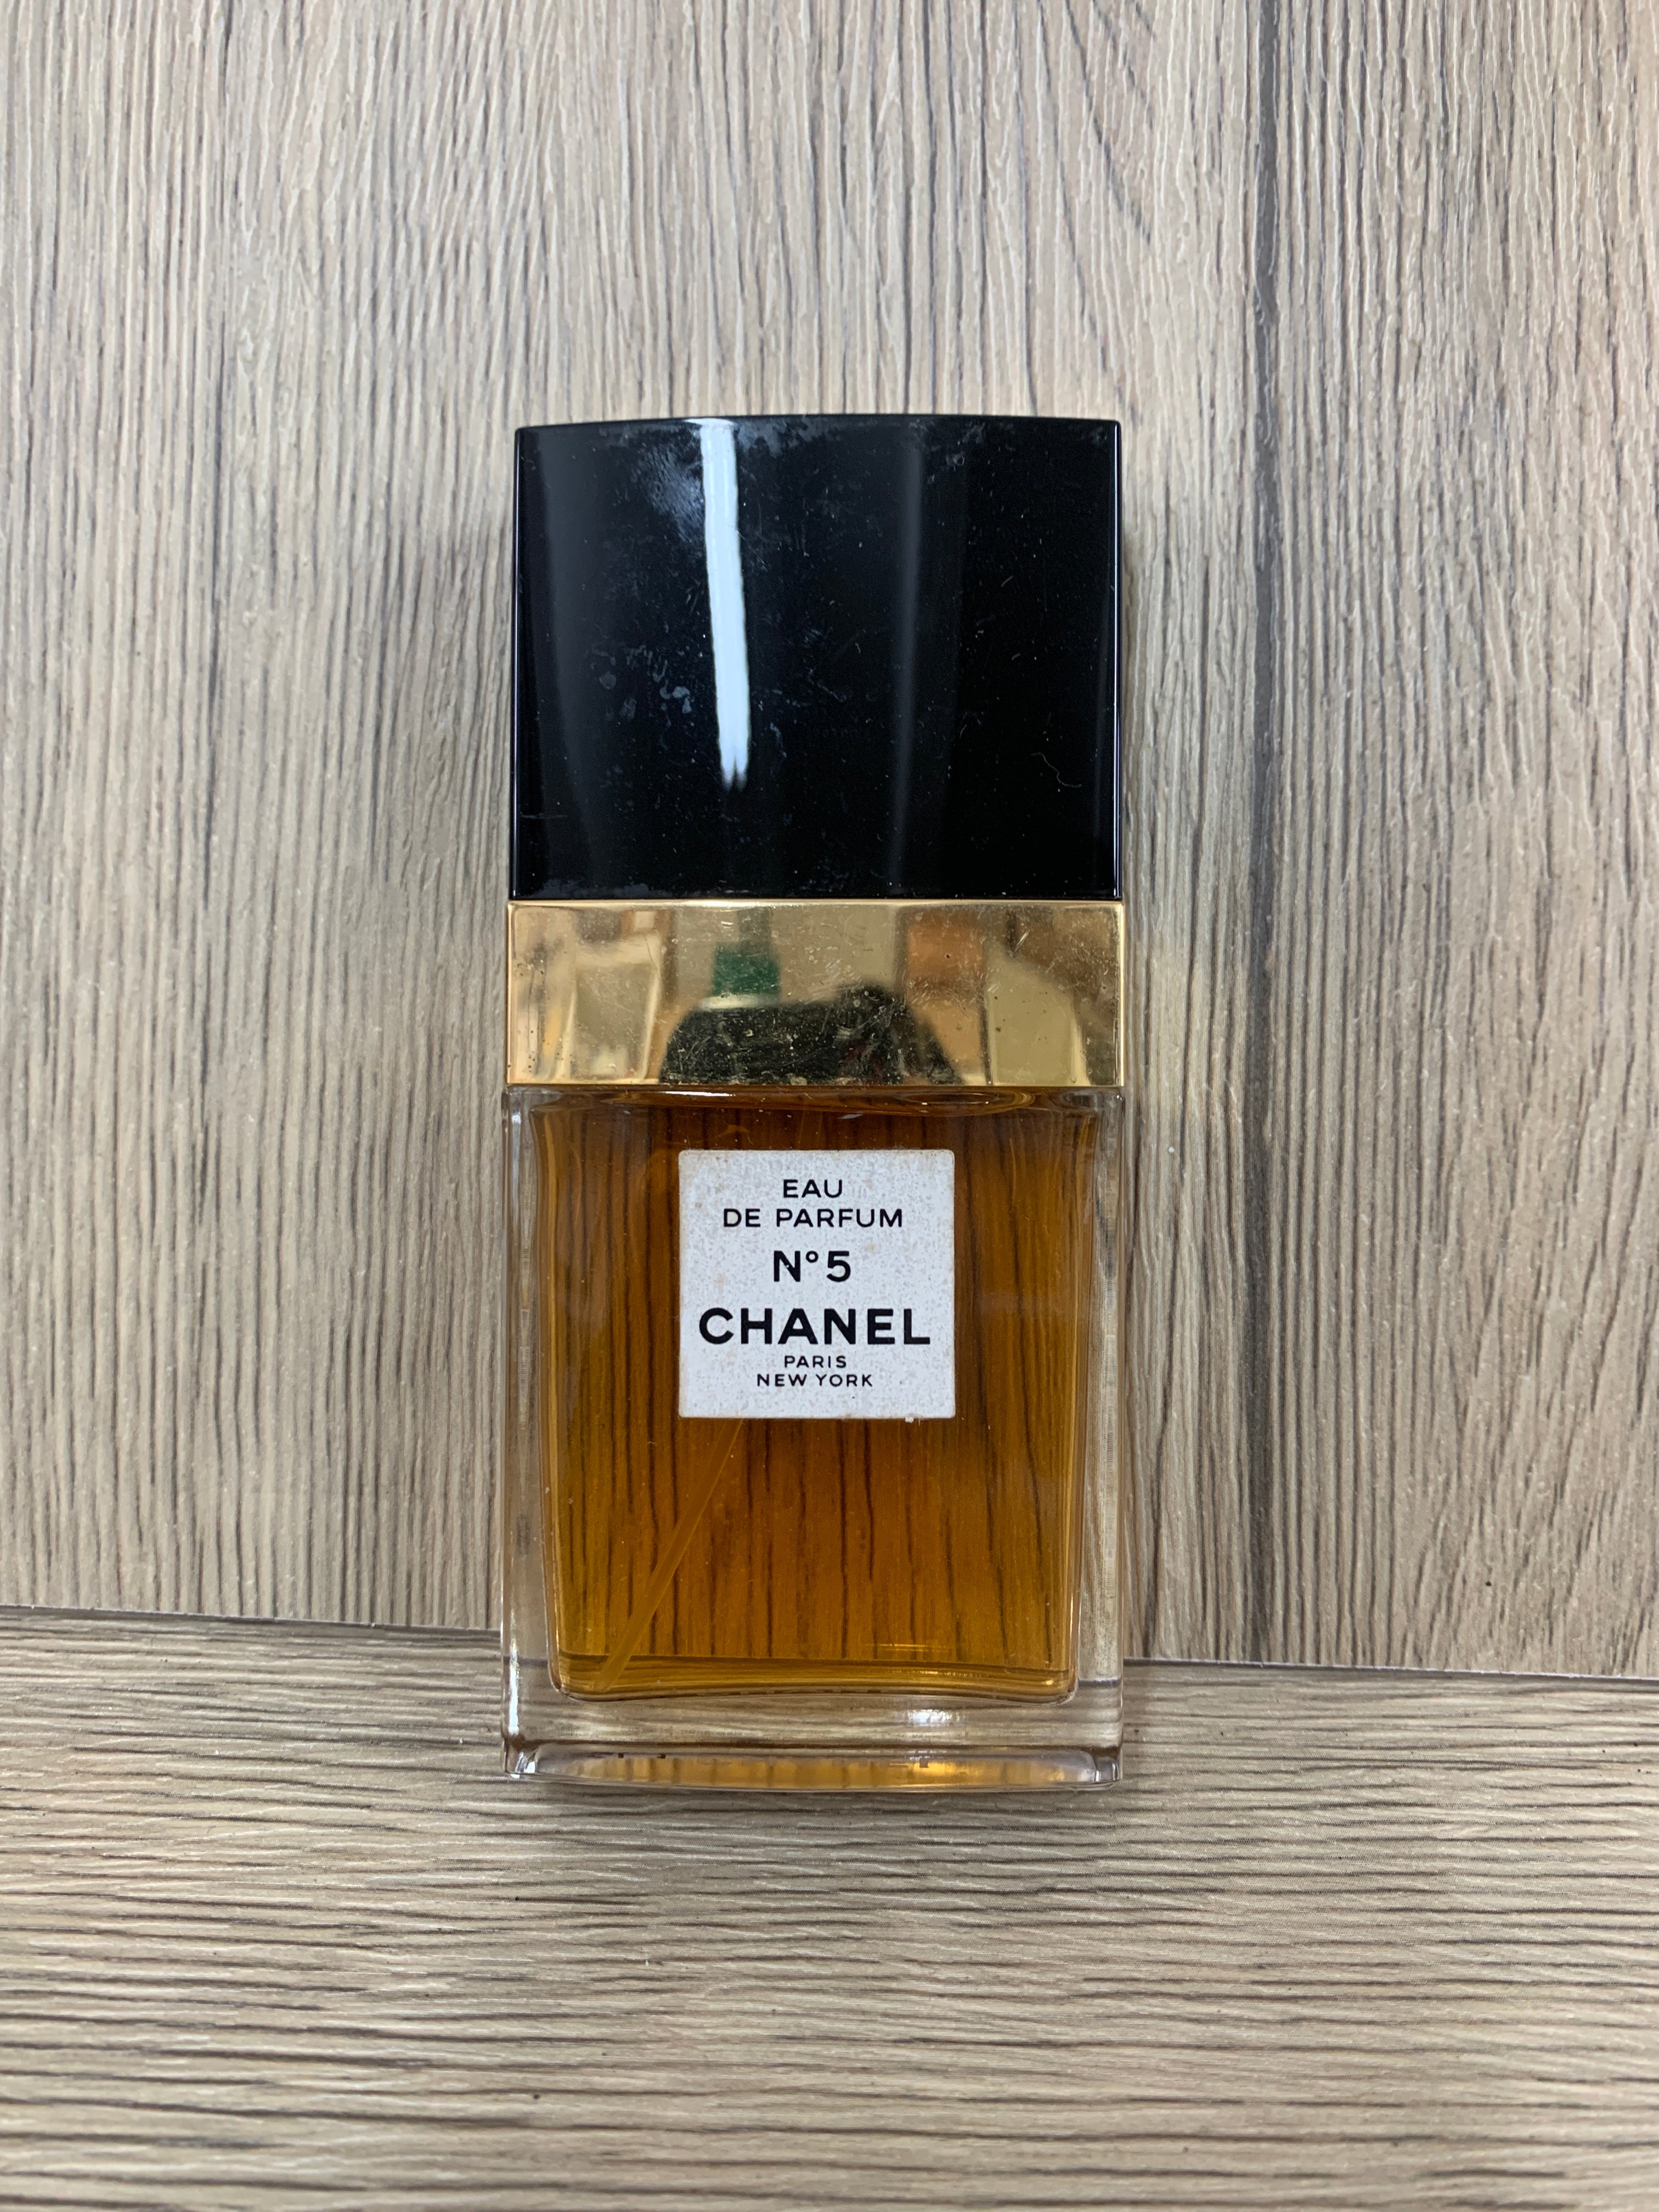 Chanel N5 EDP 100ML 3.4OZ for Sale in Los Angeles, CA - OfferUp